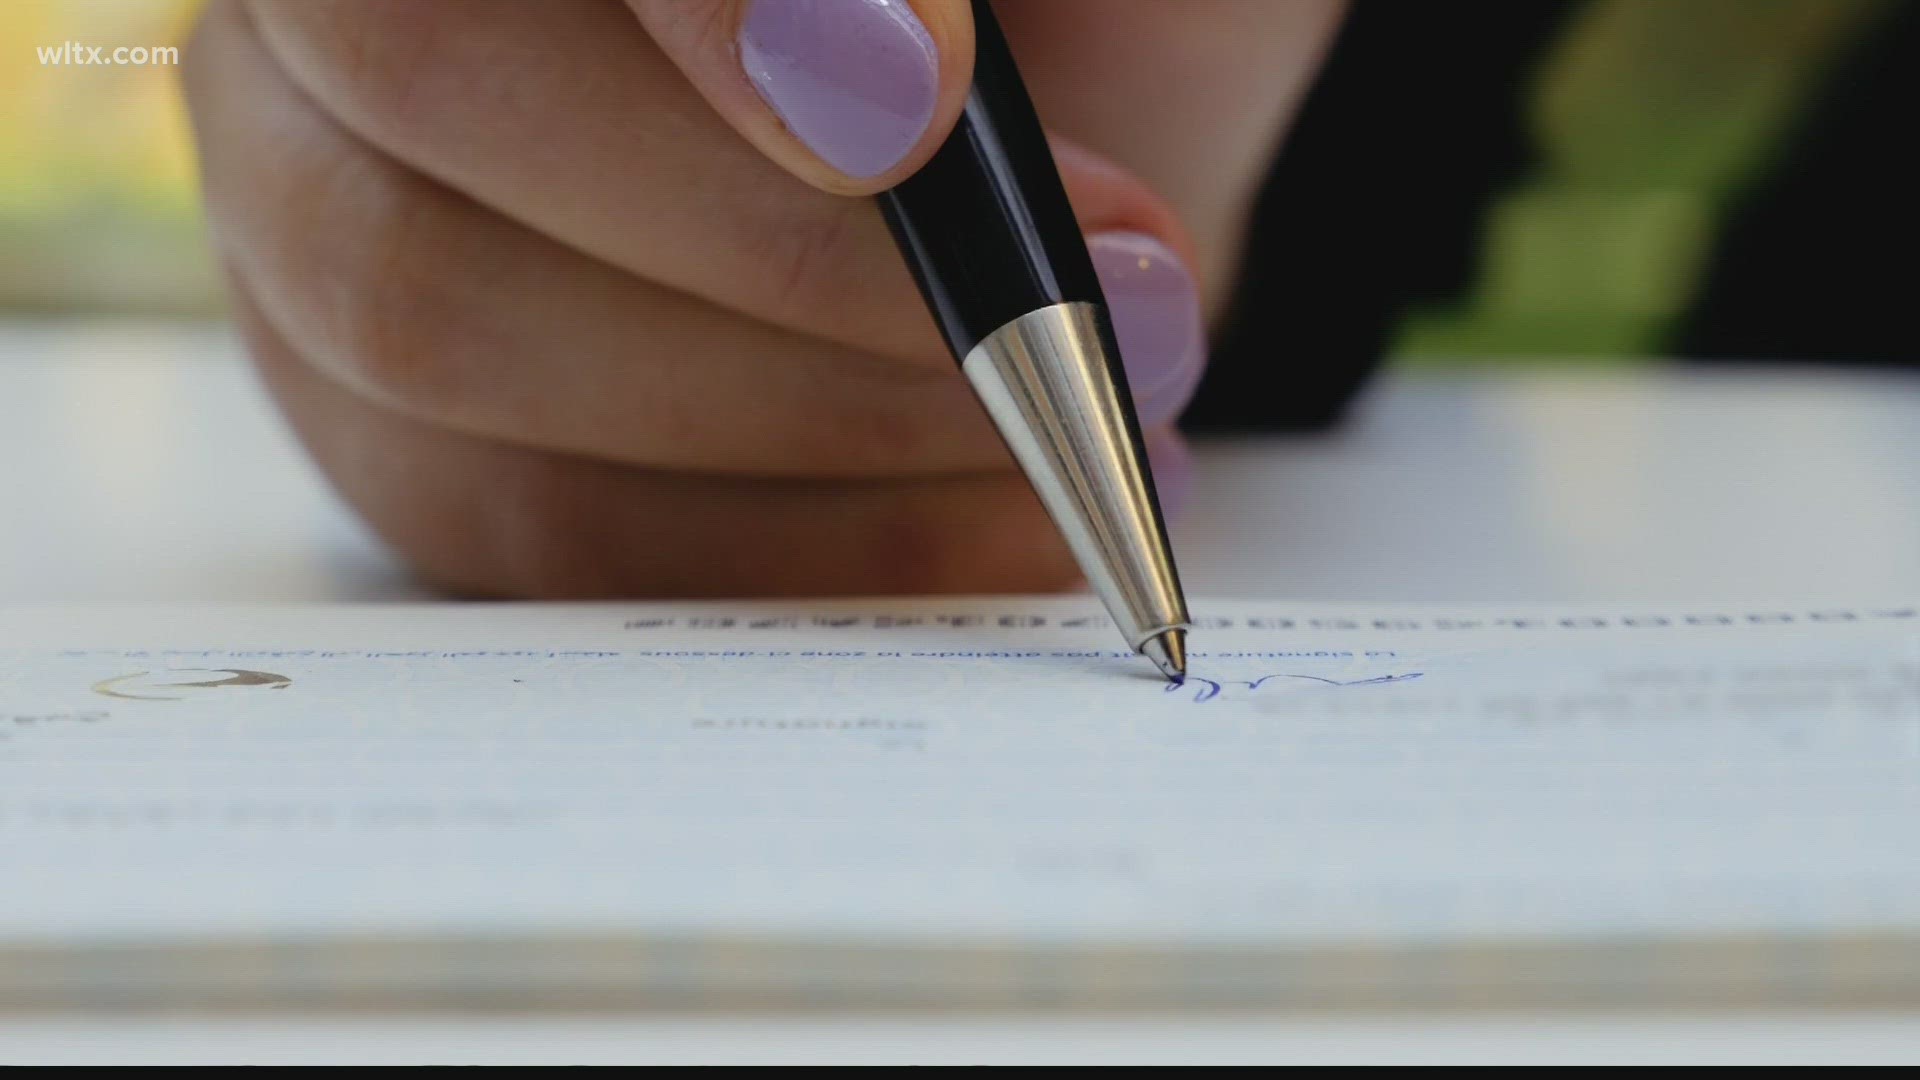 Cursive writing hasn't been mandated in the state since 2008, fifteen years ago, but a state representative wants to bring it back.